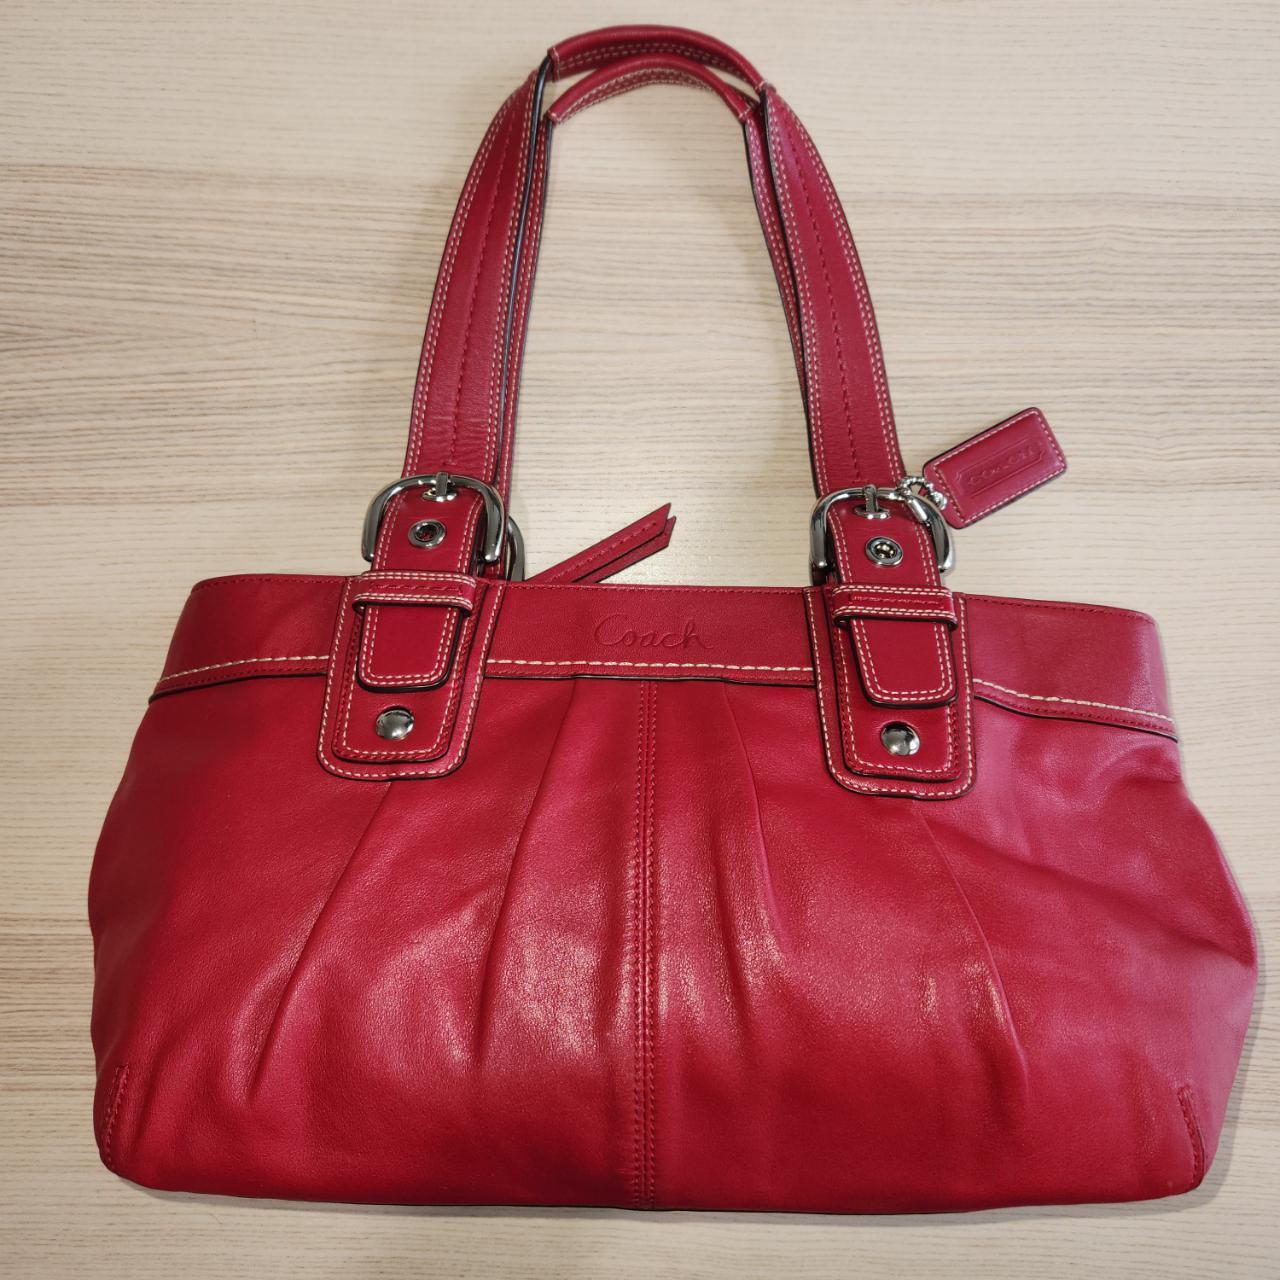 Coach red patent leather bag purse, bright red tote | eBay